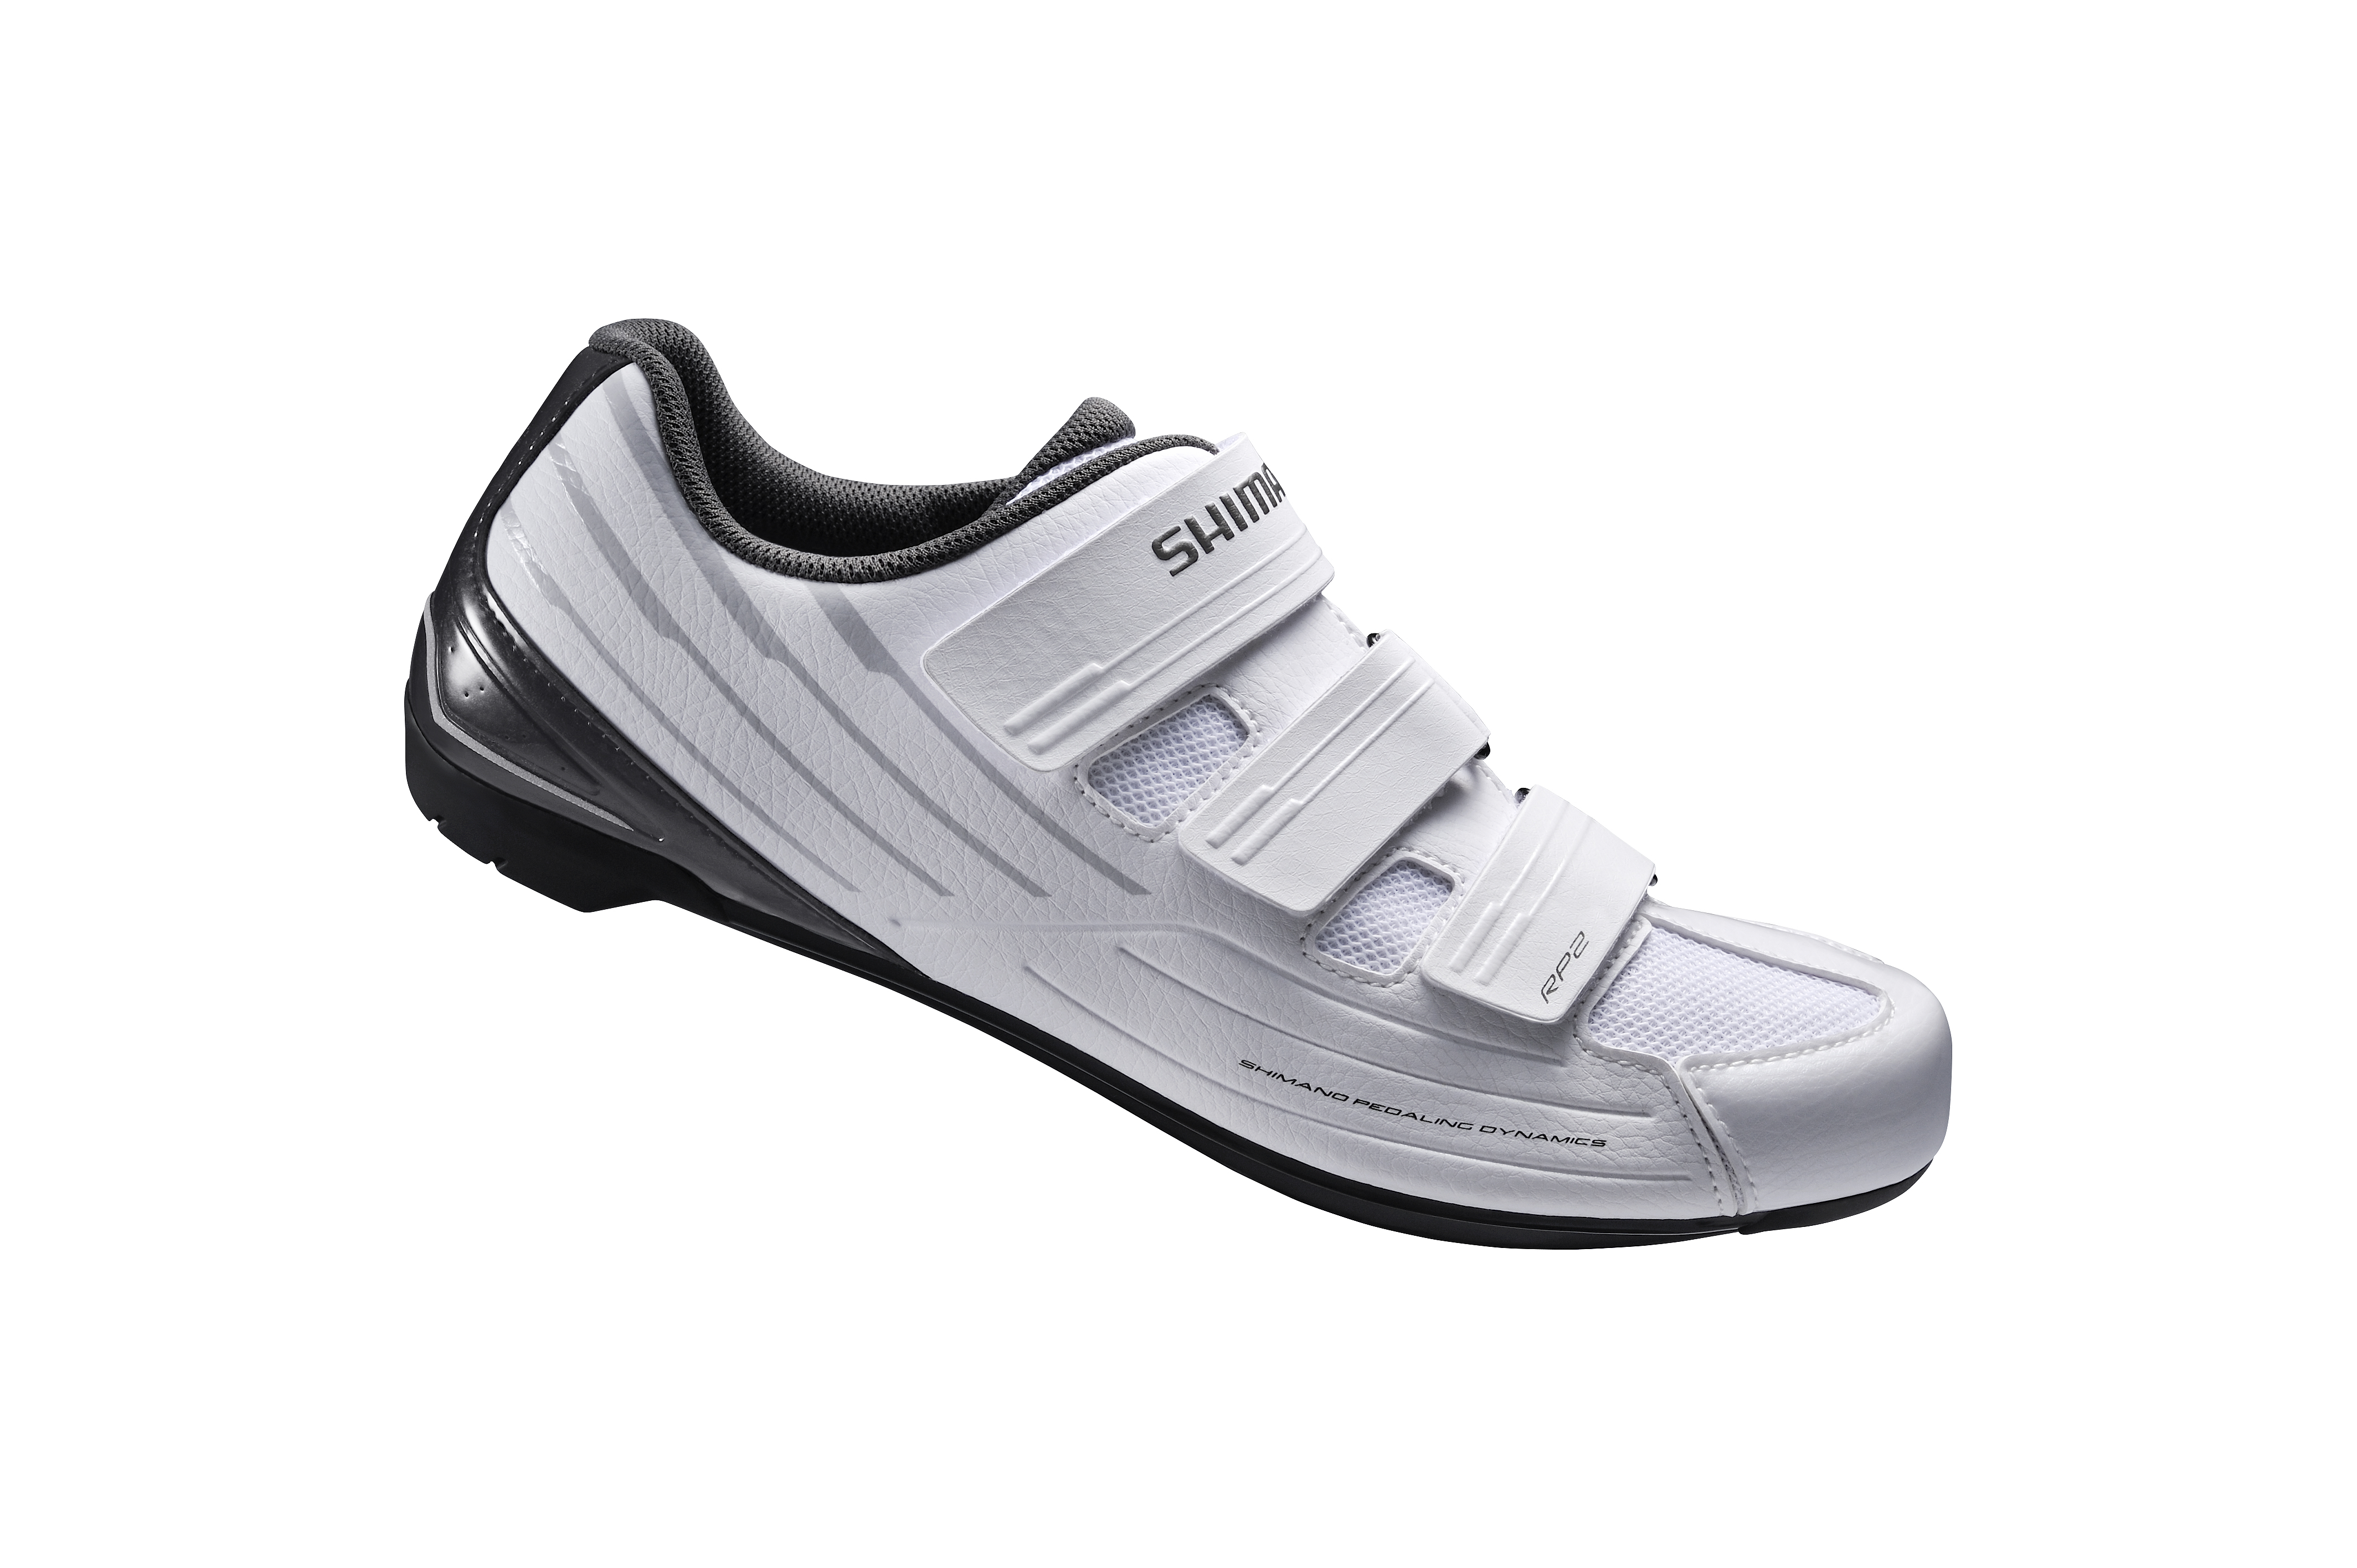 The RP2 Performance Road shoe in white.